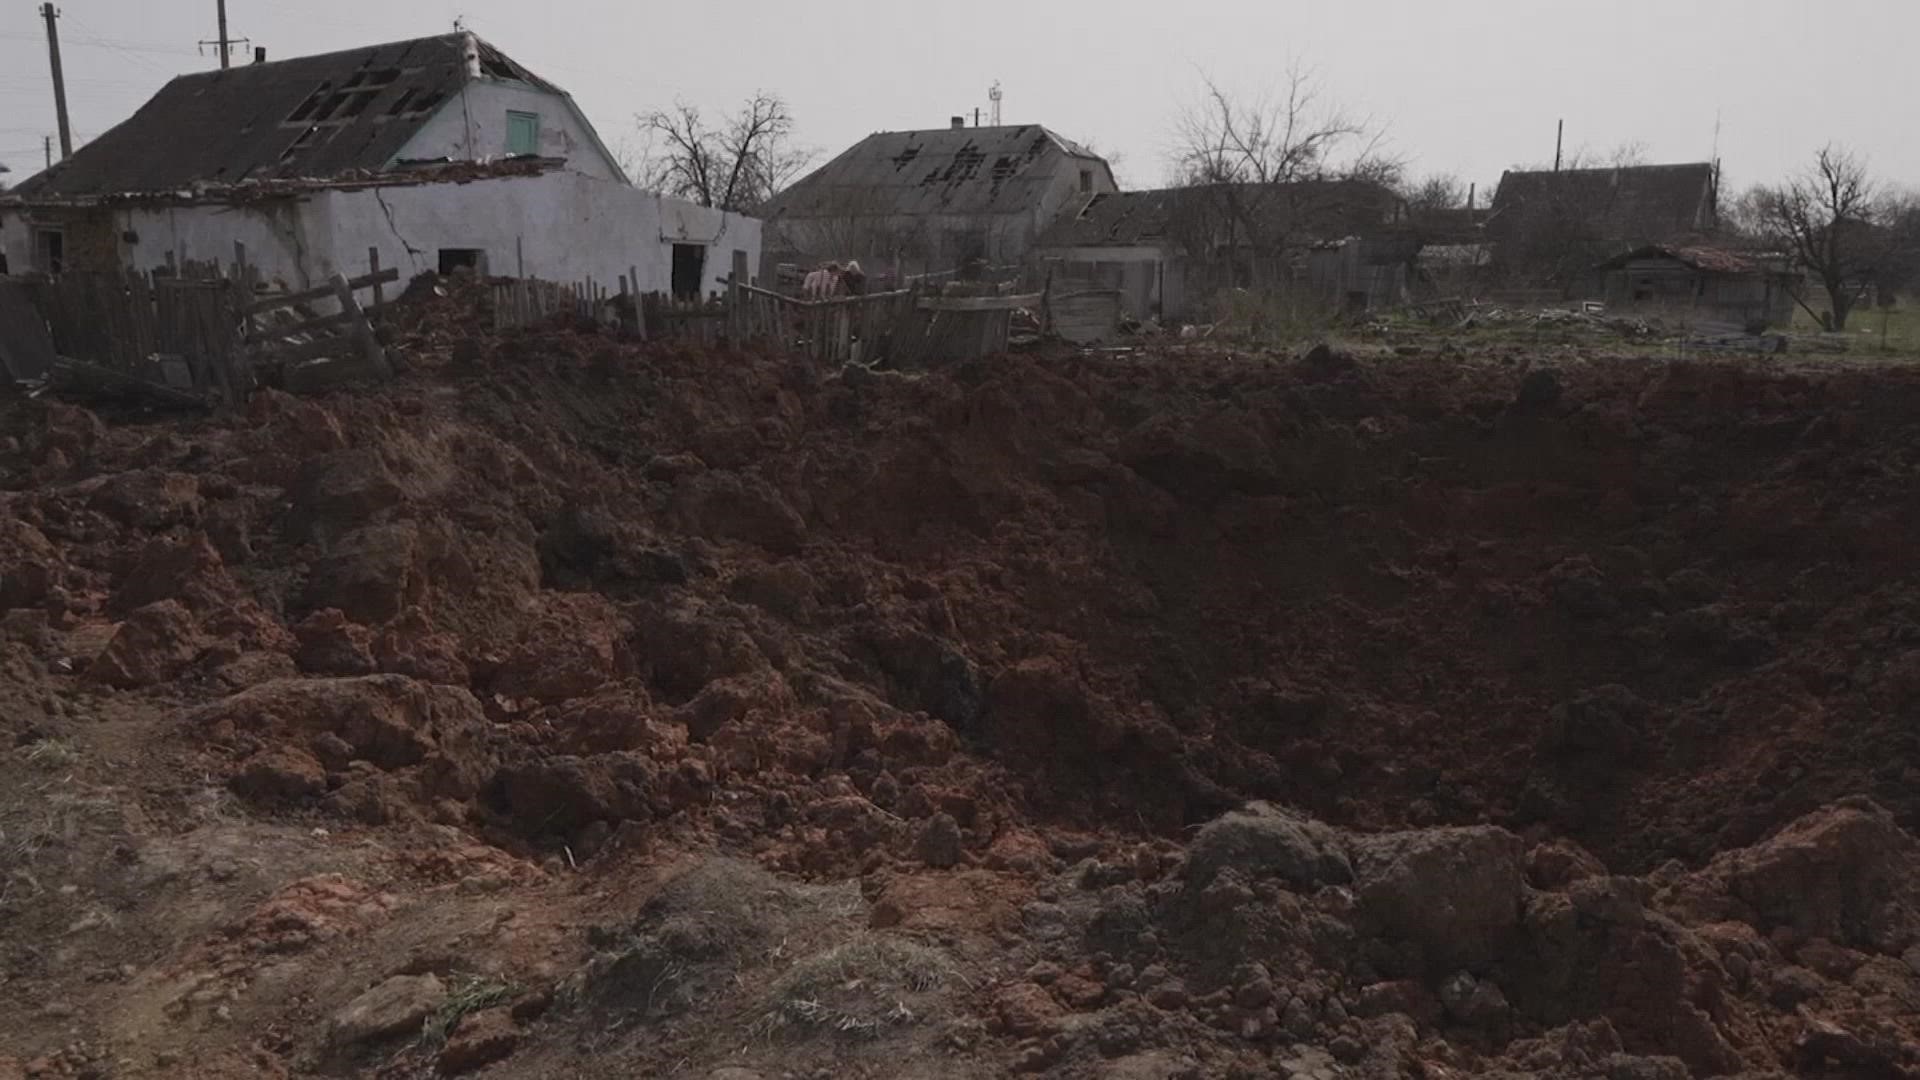 A bomb hit Ukraine's Mykolaiv District Tuesday. Nobody was killed, but the blast left a huge crater and damaged houses.